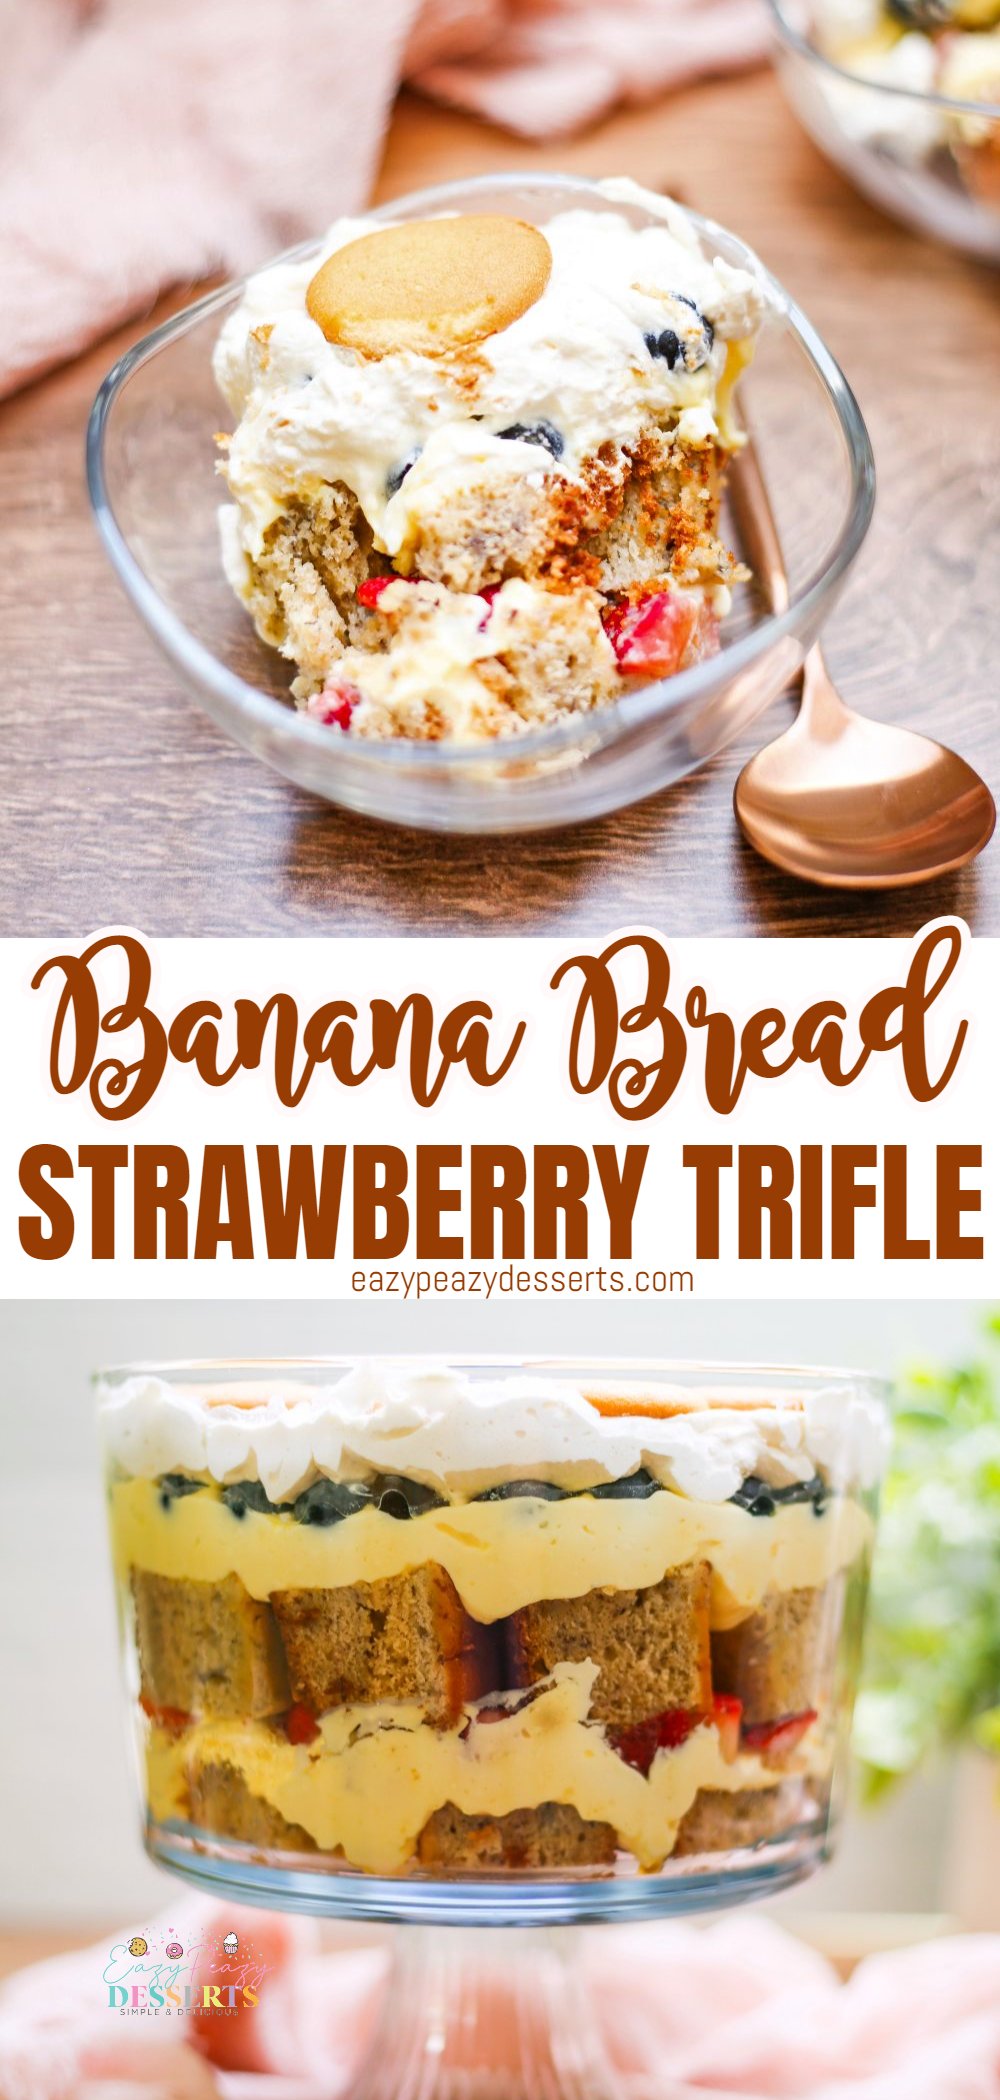 Photo collage of banana trifle made with banana bread, strawberry and blueberry